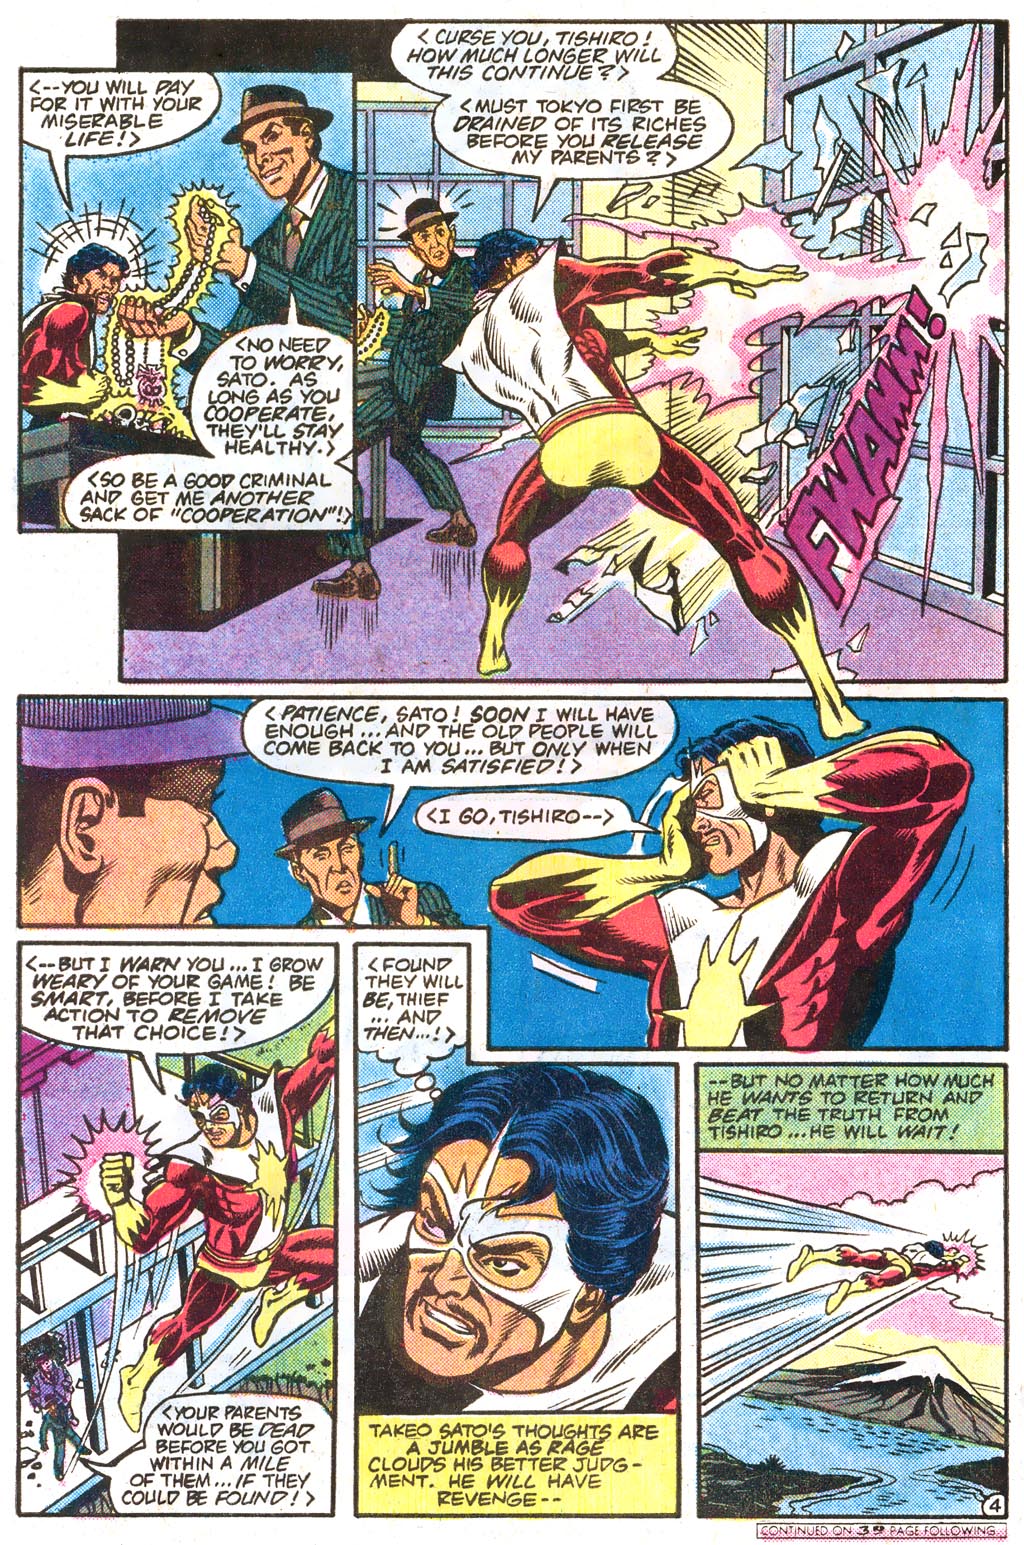 The New Adventures of Superboy 47 Page 5